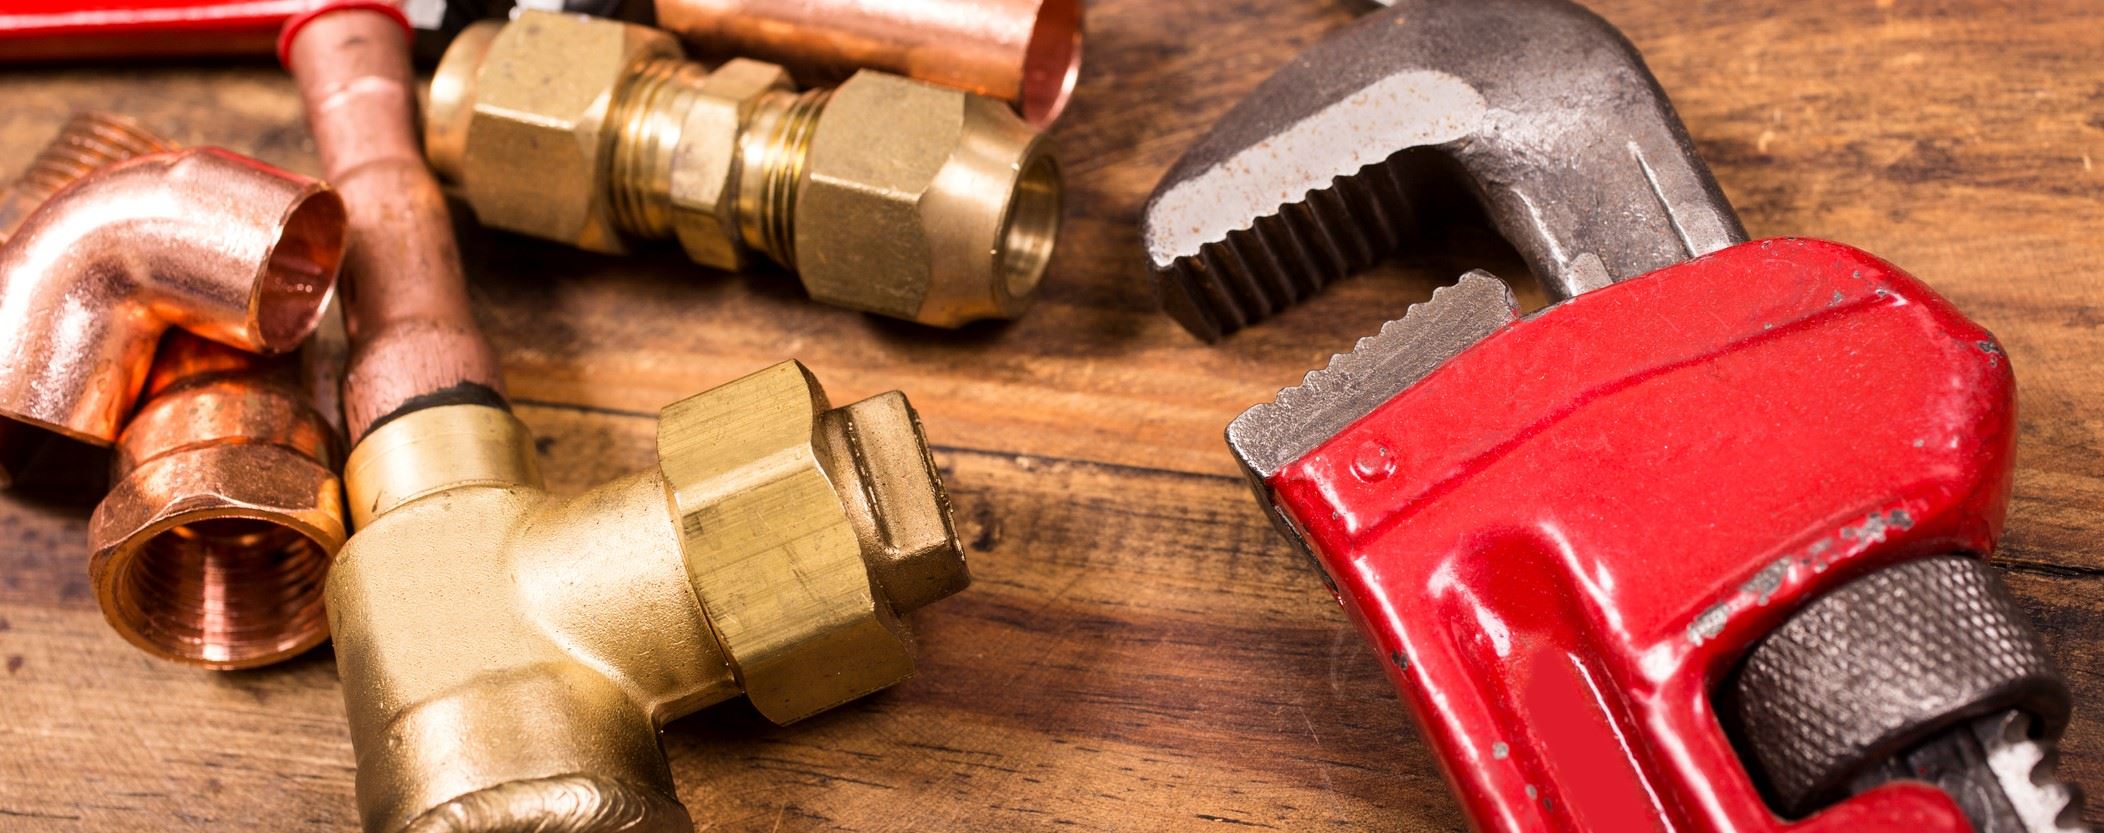 Every Homeowner Should Know These Plumbing Basics